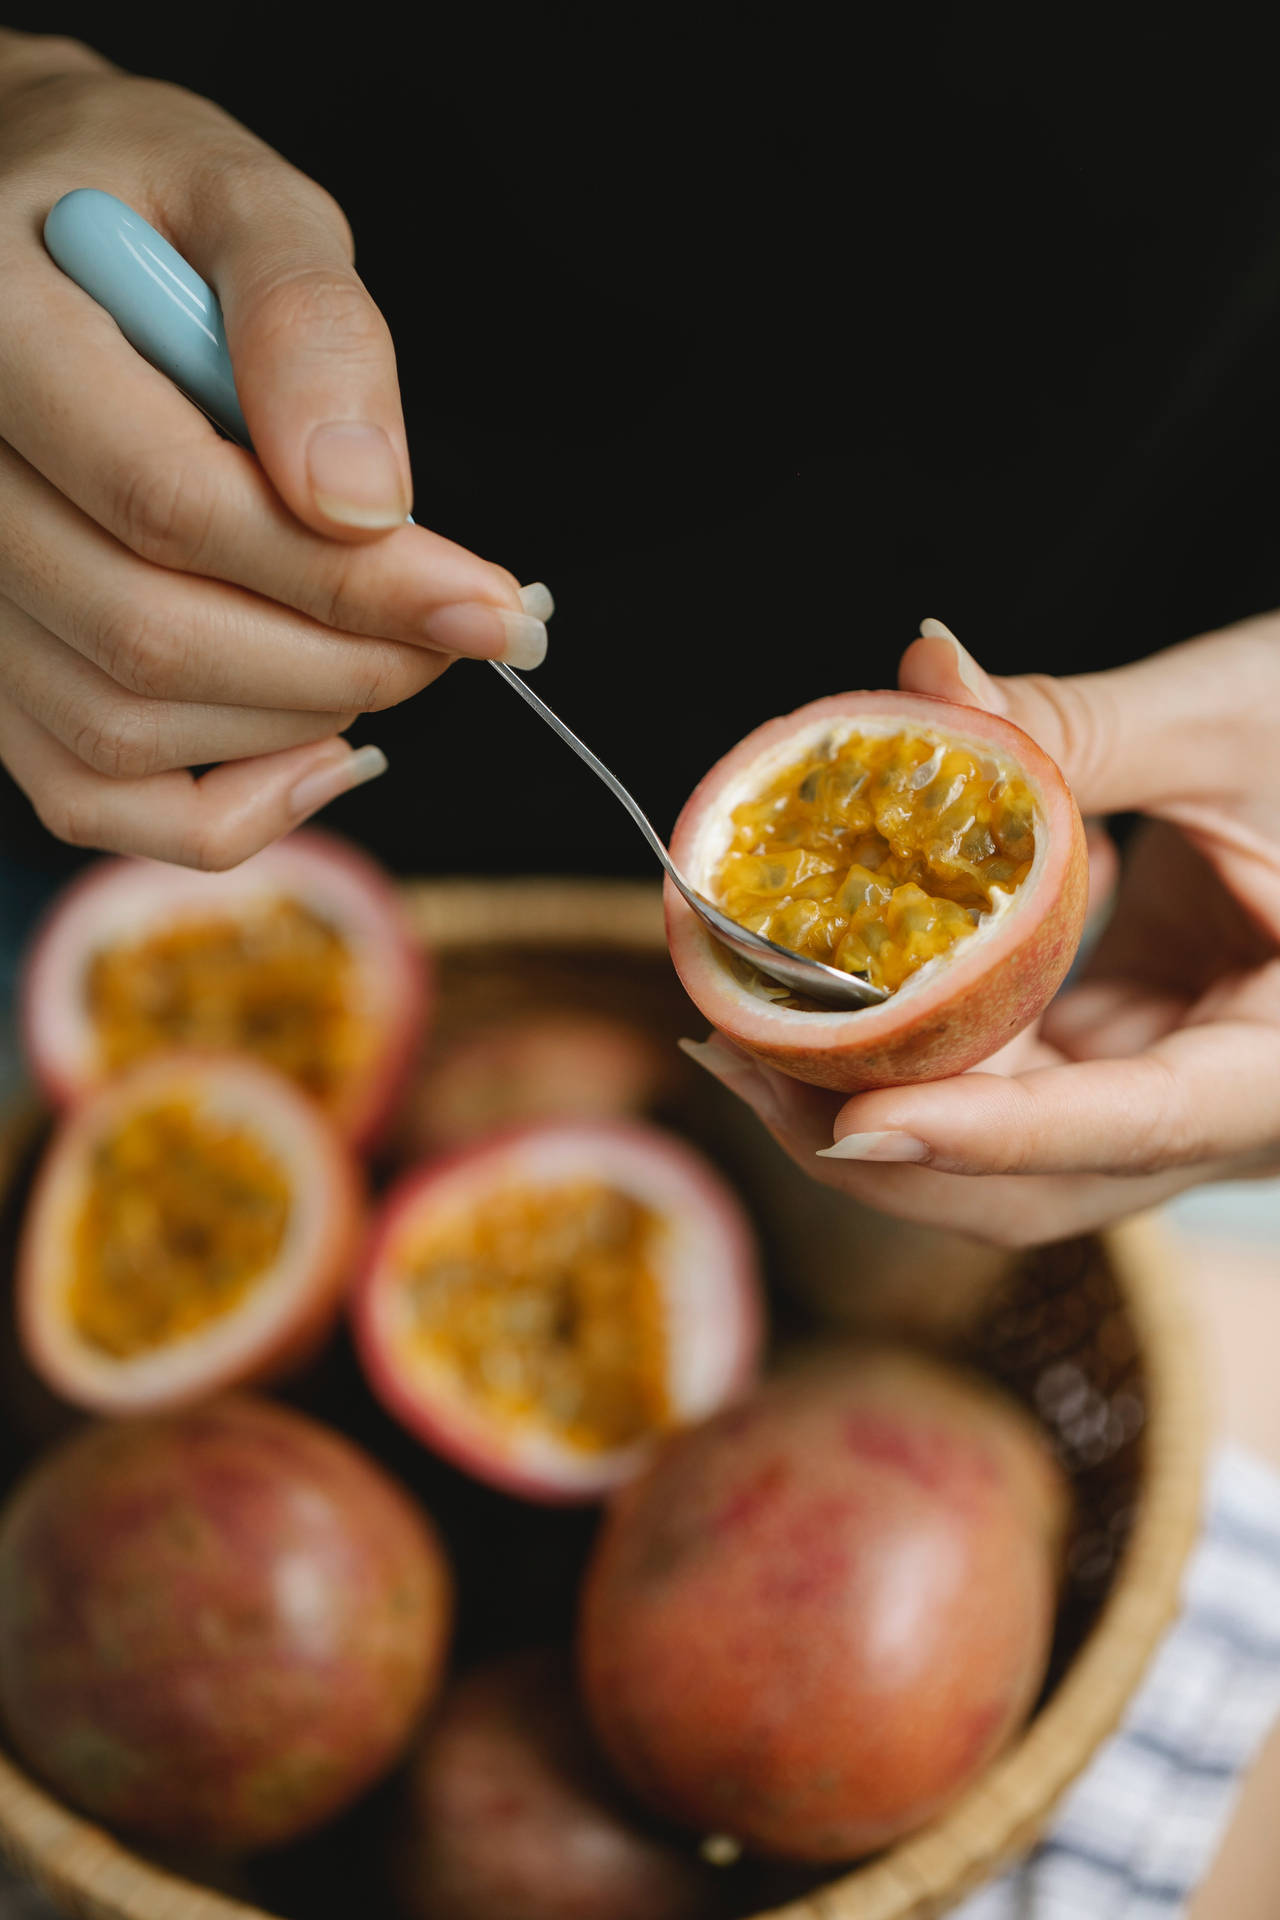 Delicious Passion Fruit Scooped With Spoon Wallpaper